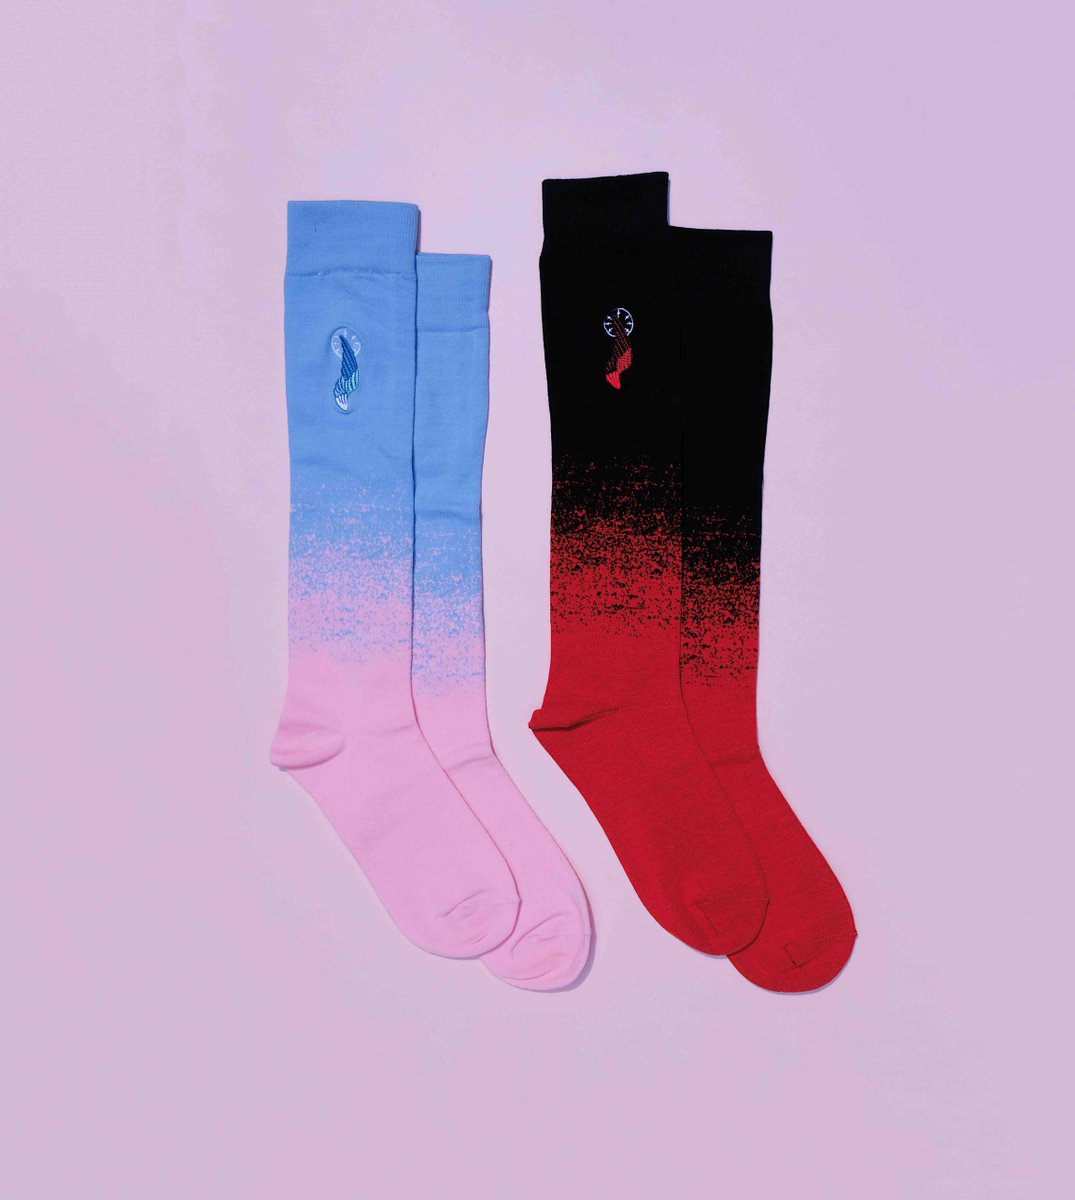 simple background solo socks no shoes no humans feet foot focus  illustration images